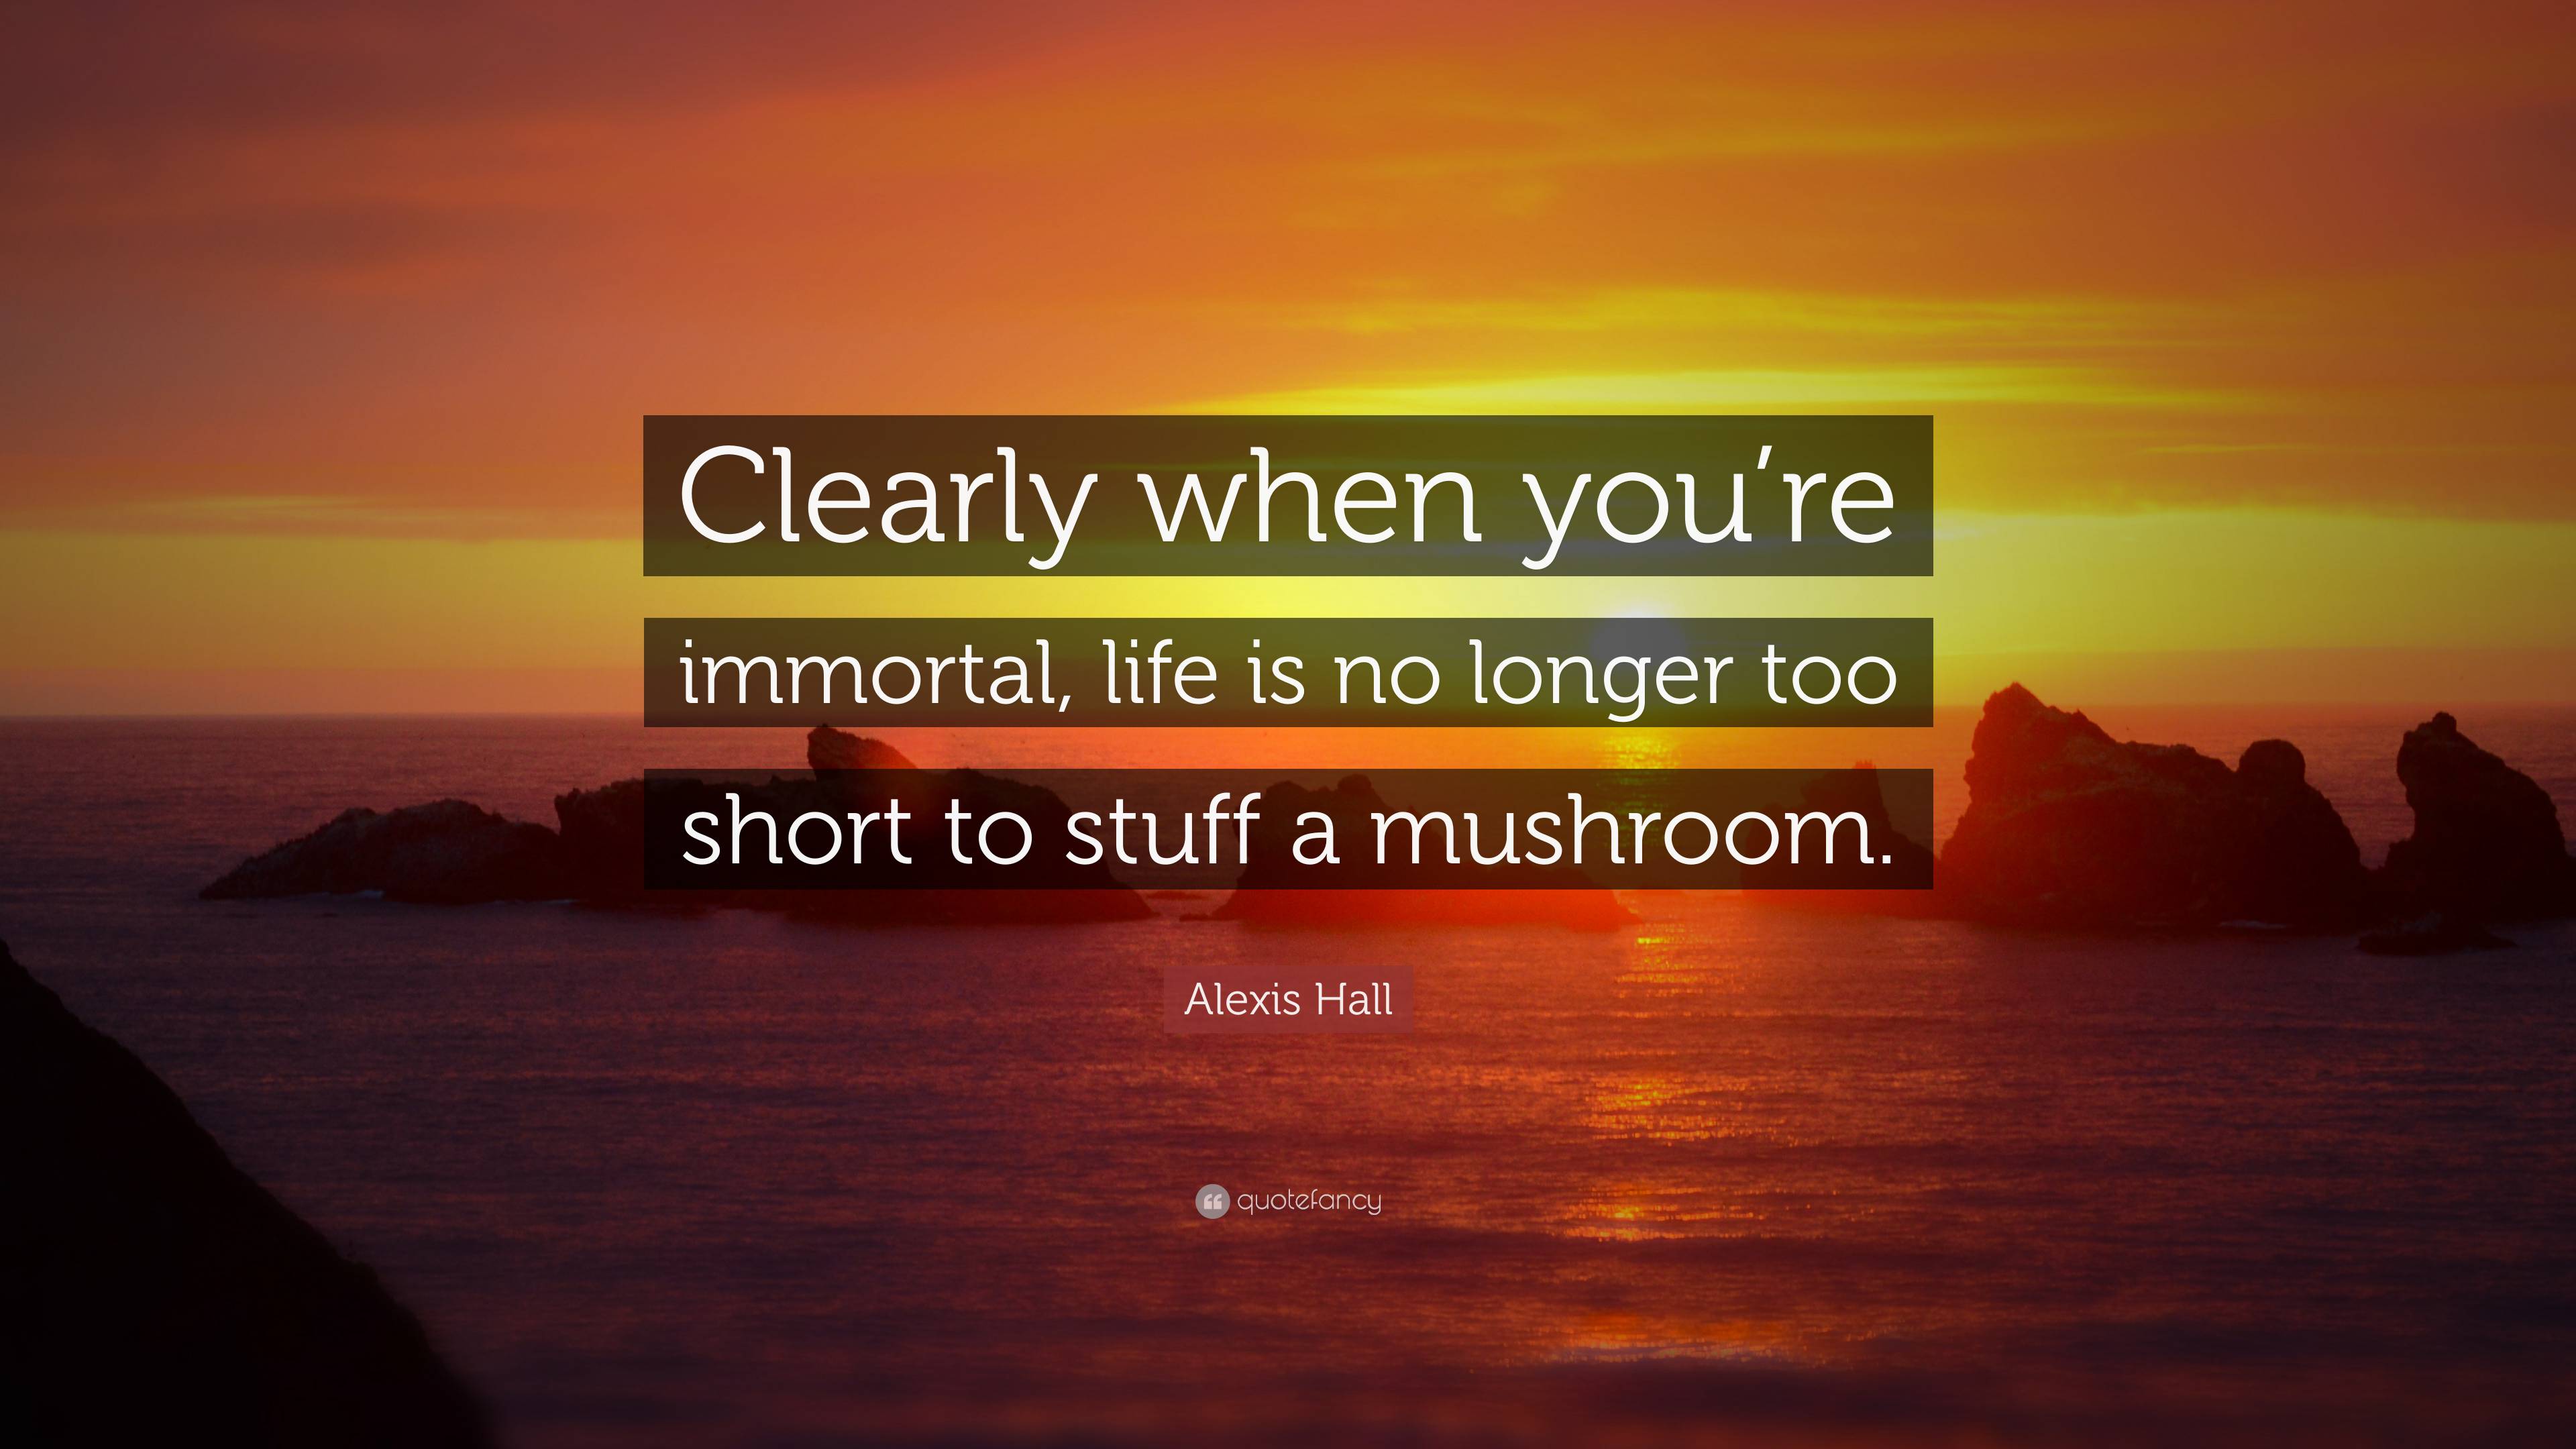 Alexis Hall Quote: “Clearly when you're immortal, life is no longer too  short to stuff